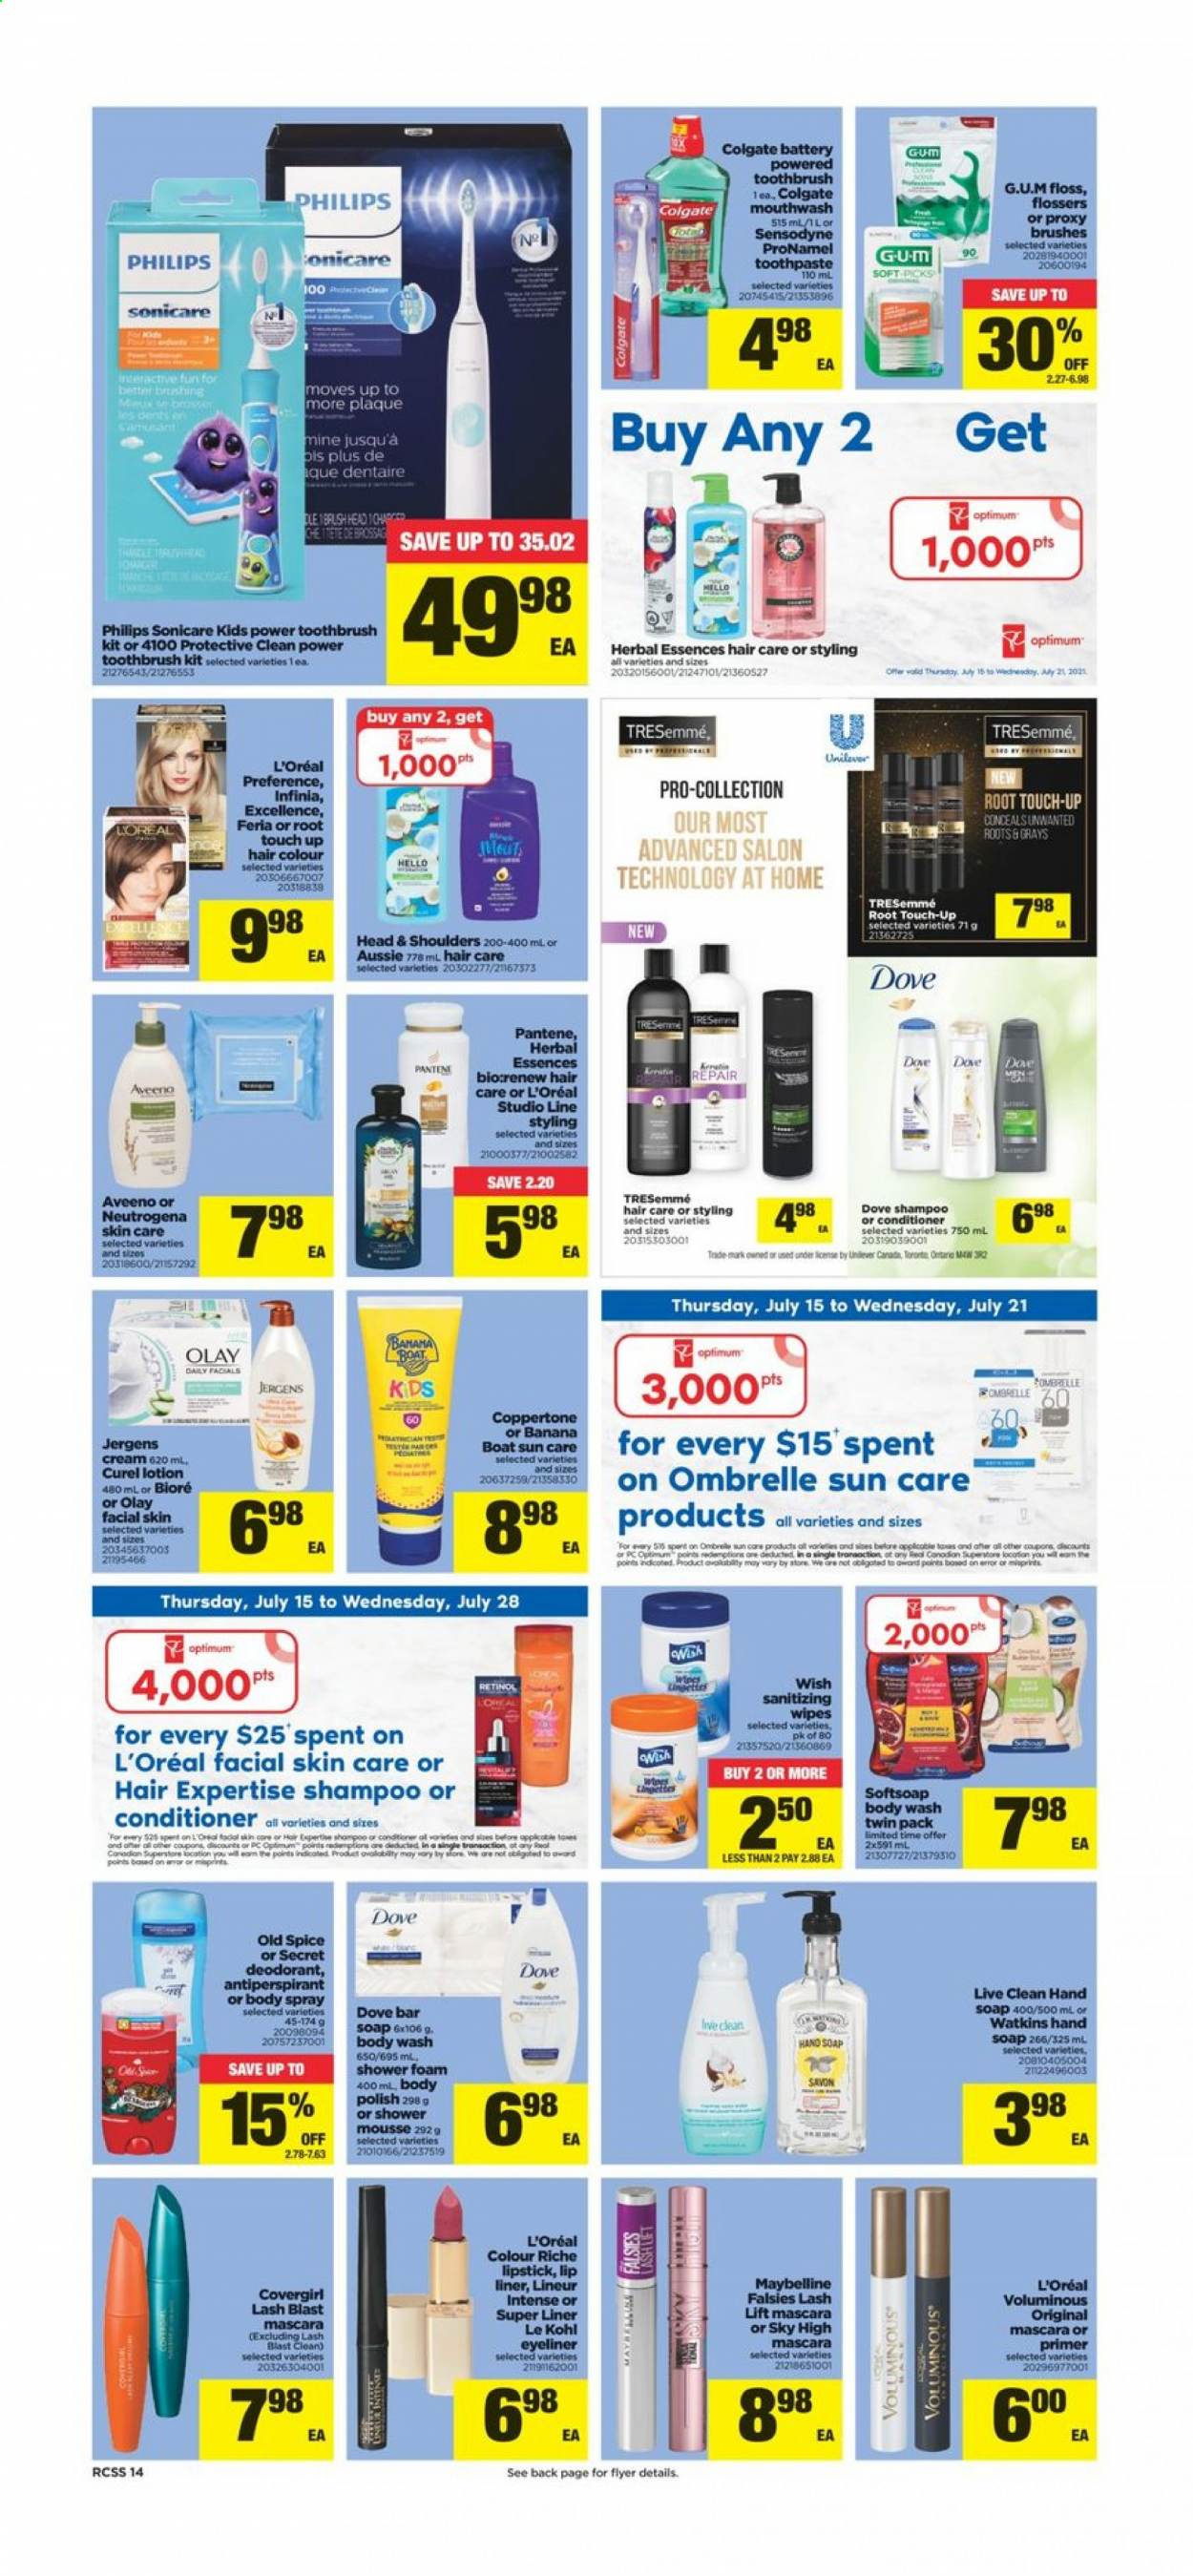 thumbnail - Real Canadian Superstore Flyer - July 15, 2021 - July 21, 2021 - Sales products - spice, tea, wipes, Aveeno, antiseptic wipes, body wash, Softsoap, hand soap, soap bar, soap, toothbrush, toothpaste, mouthwash, L’Oréal, Olay, Curél, Bioré®, Root Touch-Up, Aussie, conditioner, TRESemmé, hair color, Herbal Essences, body lotion, body spray, Jergens, anti-perspirant, polish, lipstick, eyeliner, Optimum, Sonicare, mascara, Maybelline, Neutrogena, shampoo, Head & Shoulders, Pantene, Old Spice, Sensodyne, deodorant. Page 14.